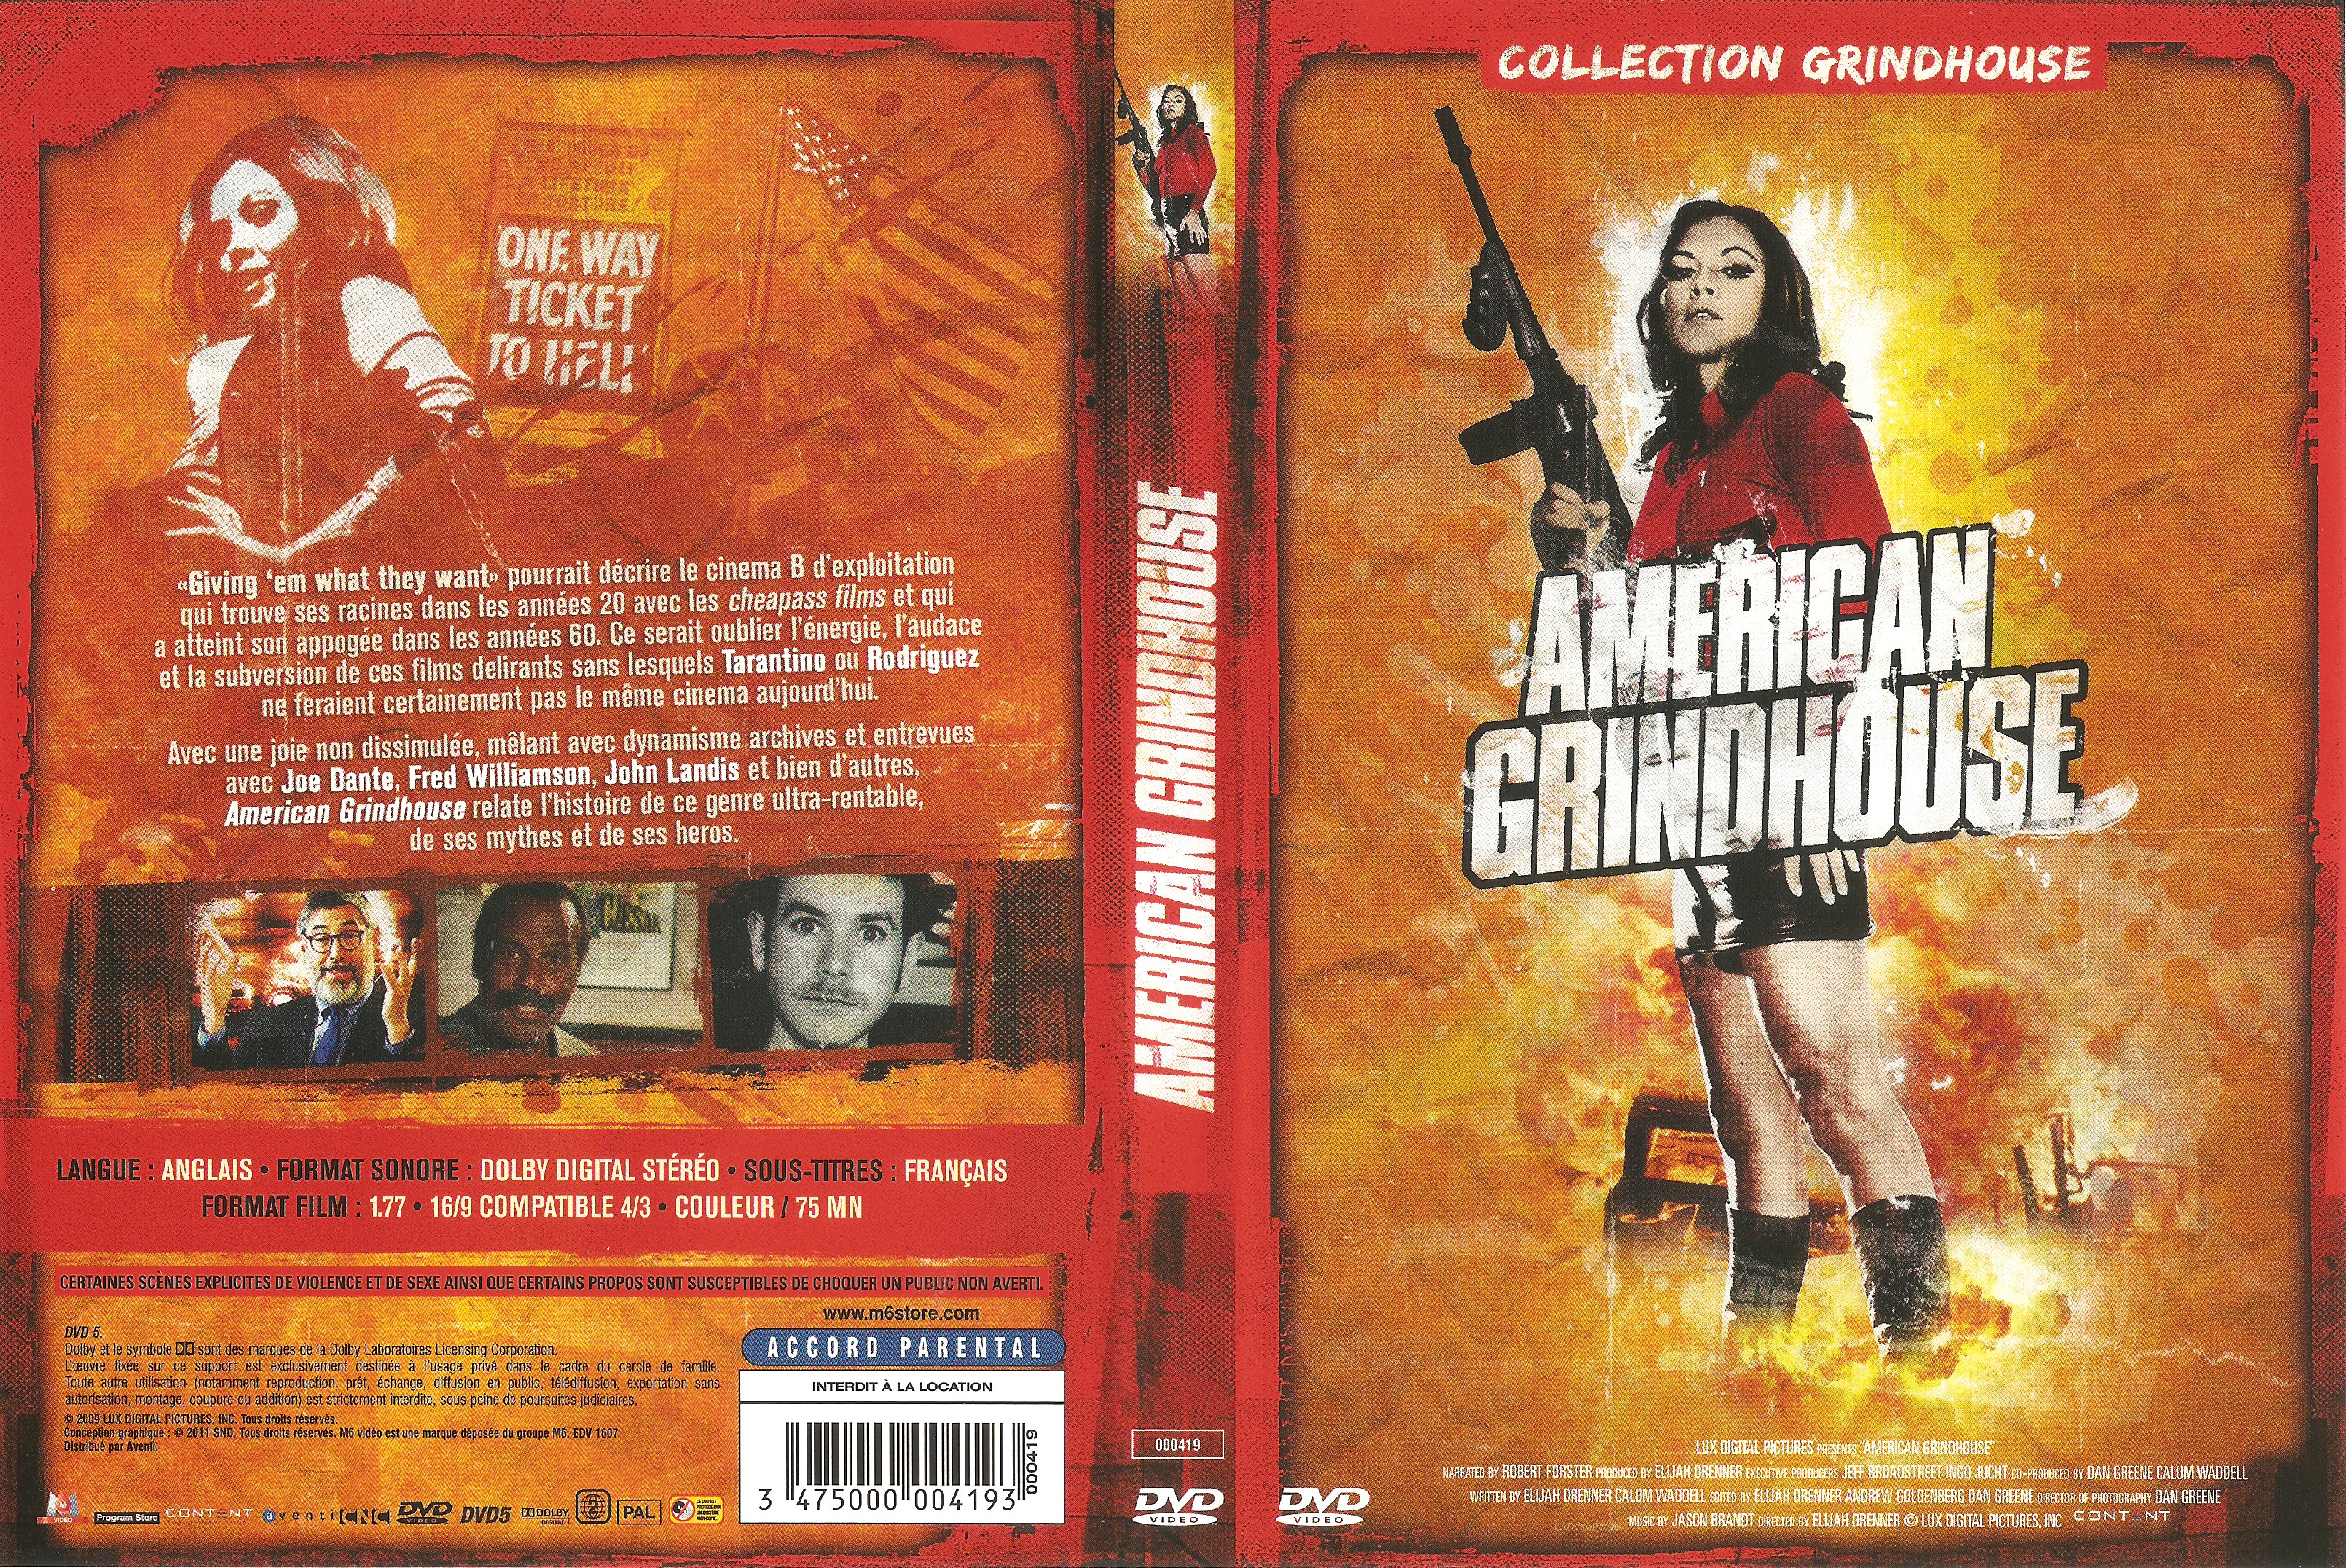 Jaquette DVD American grindhouse